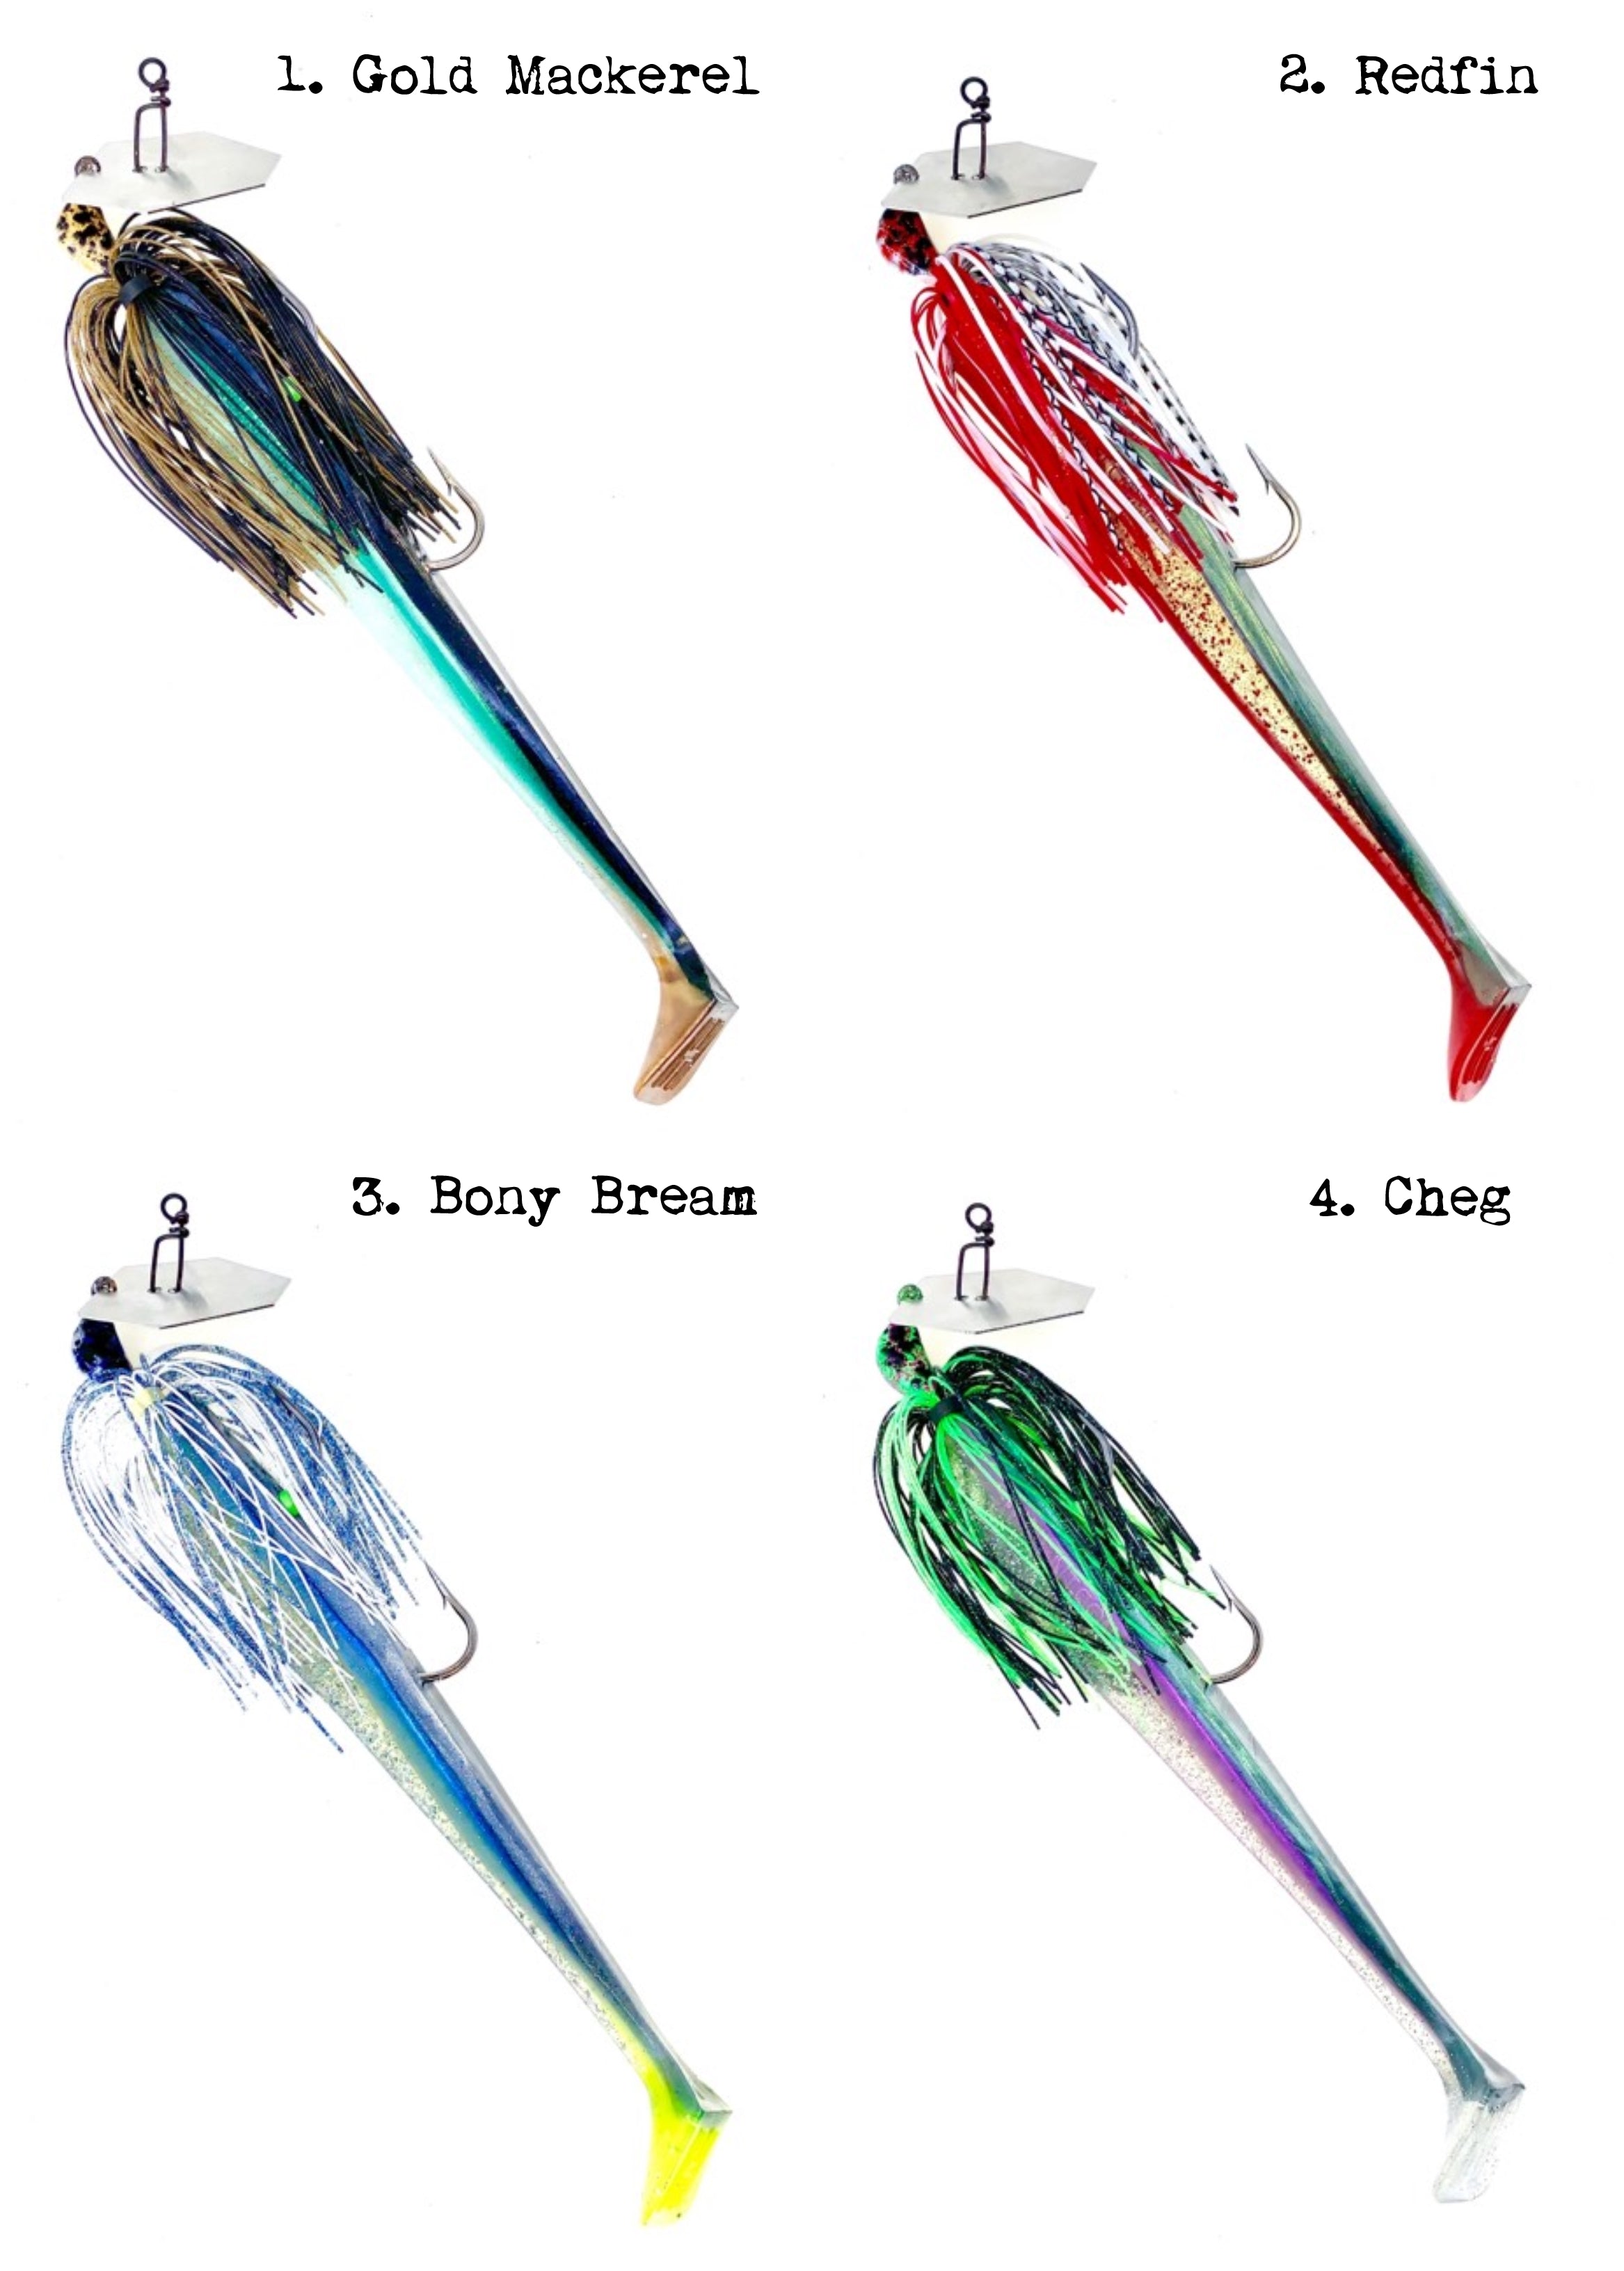 250mm 1 1/2oz Chatterbait – Cod King Lures